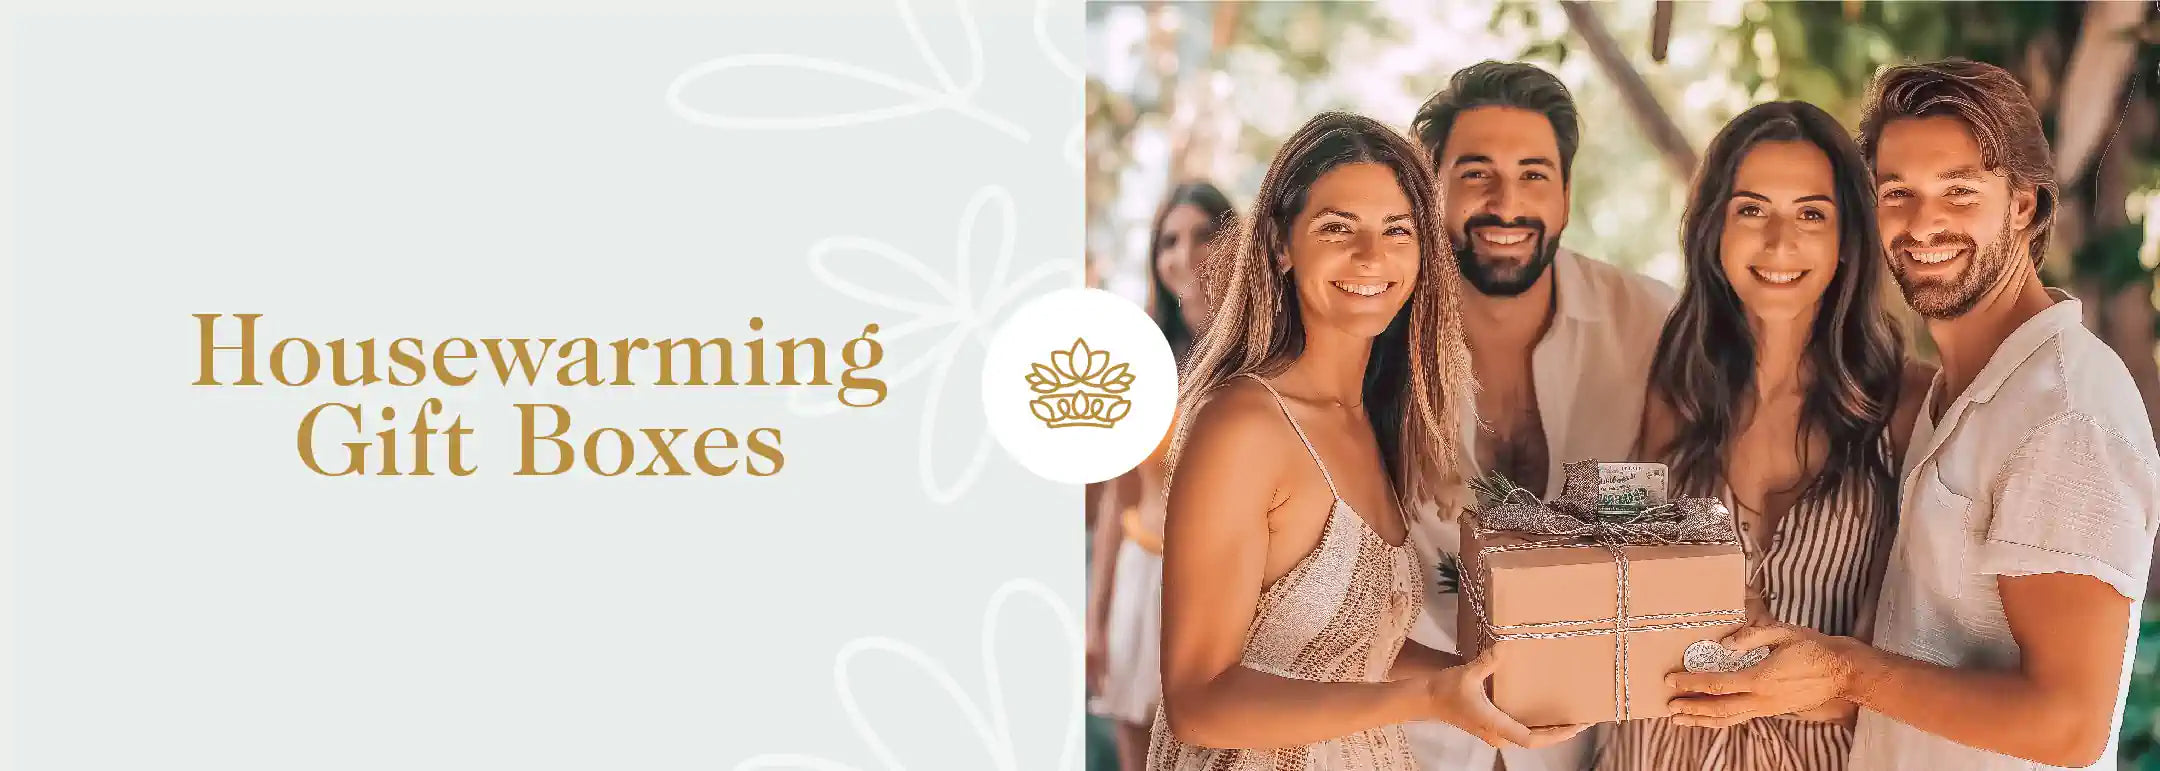 Two joyful couples presenting a housewarming gift box, sharing smiles and happiness at a festive gathering, ideal for celebrating new beginnings. Featured in the Housewarming Gift Boxes Collection at Fabulous Flowers and Gifts.